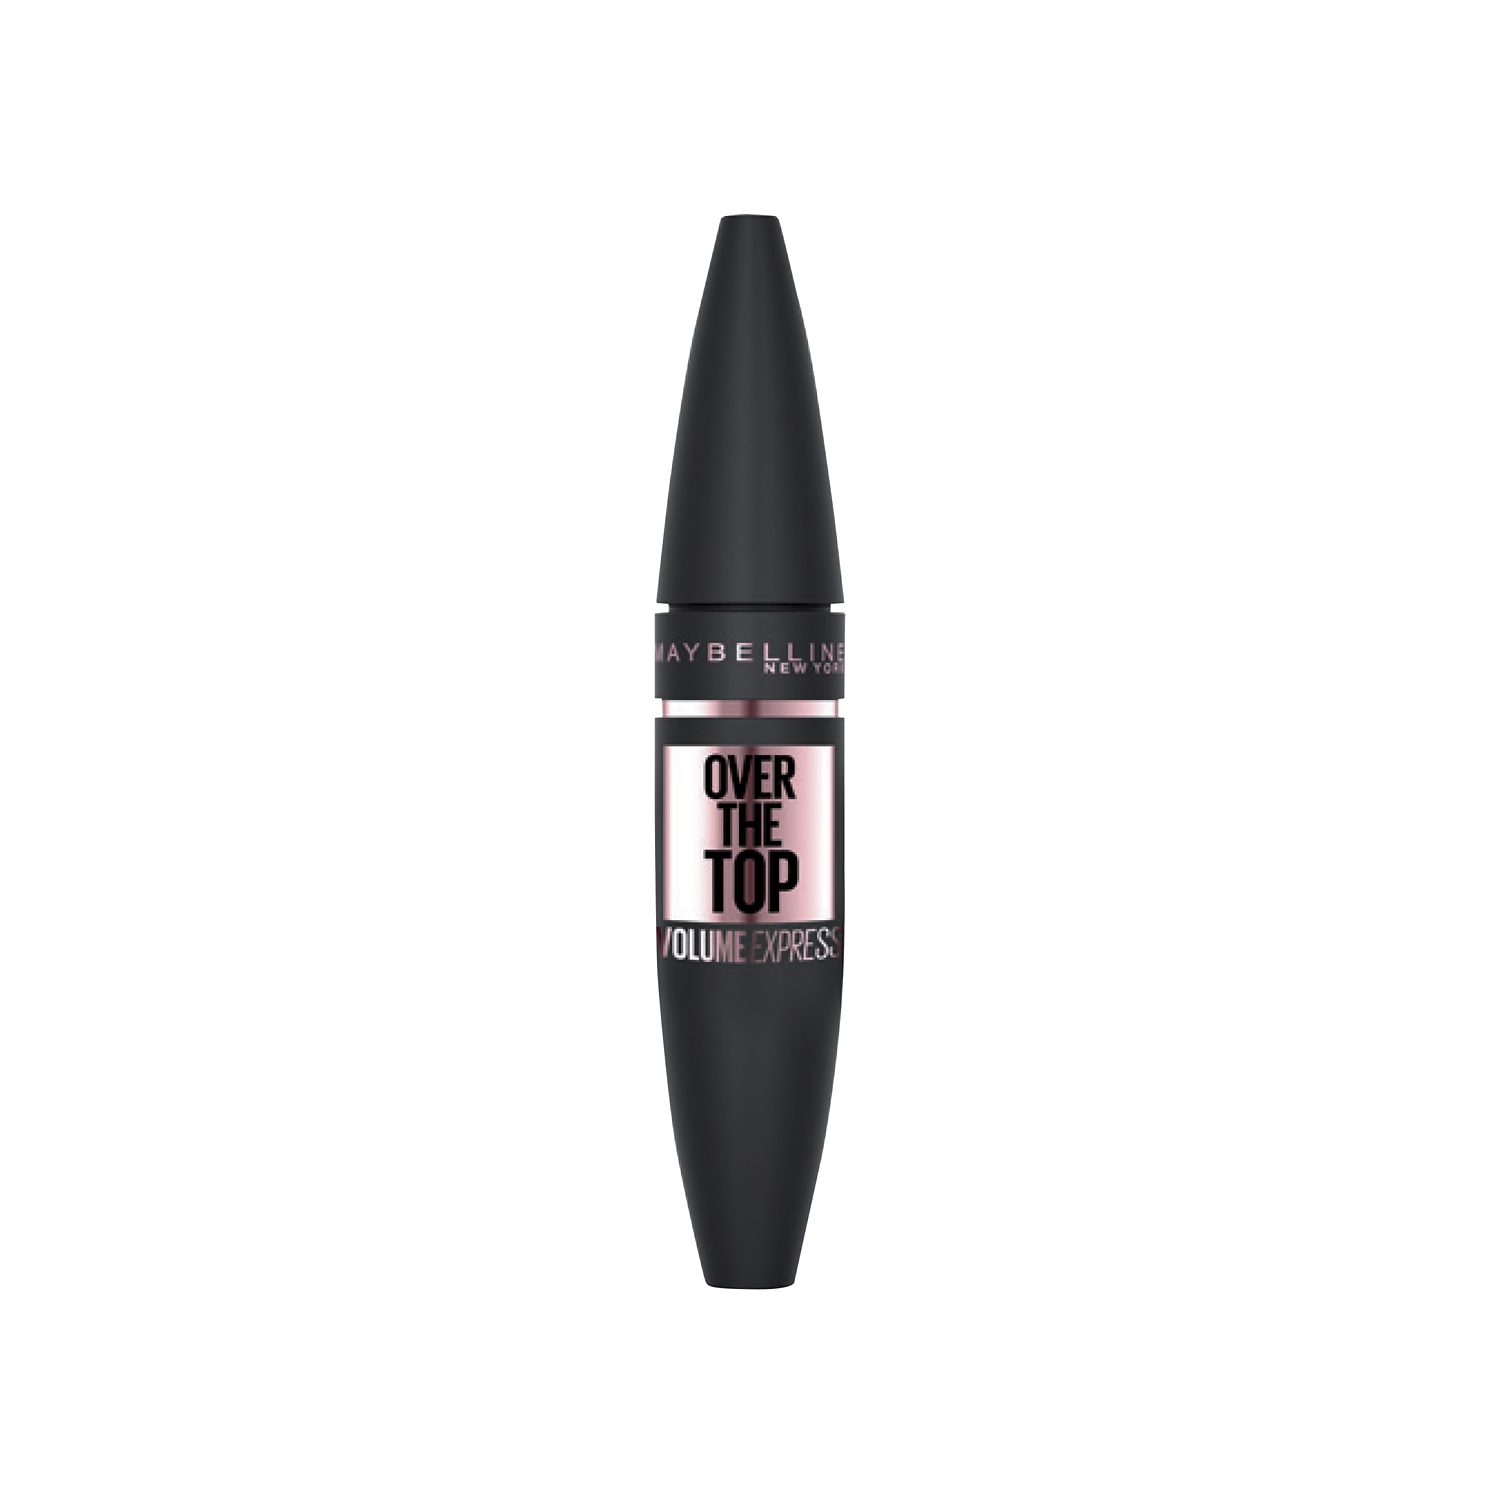 MAYBELLINE Mascara "Over the Top"